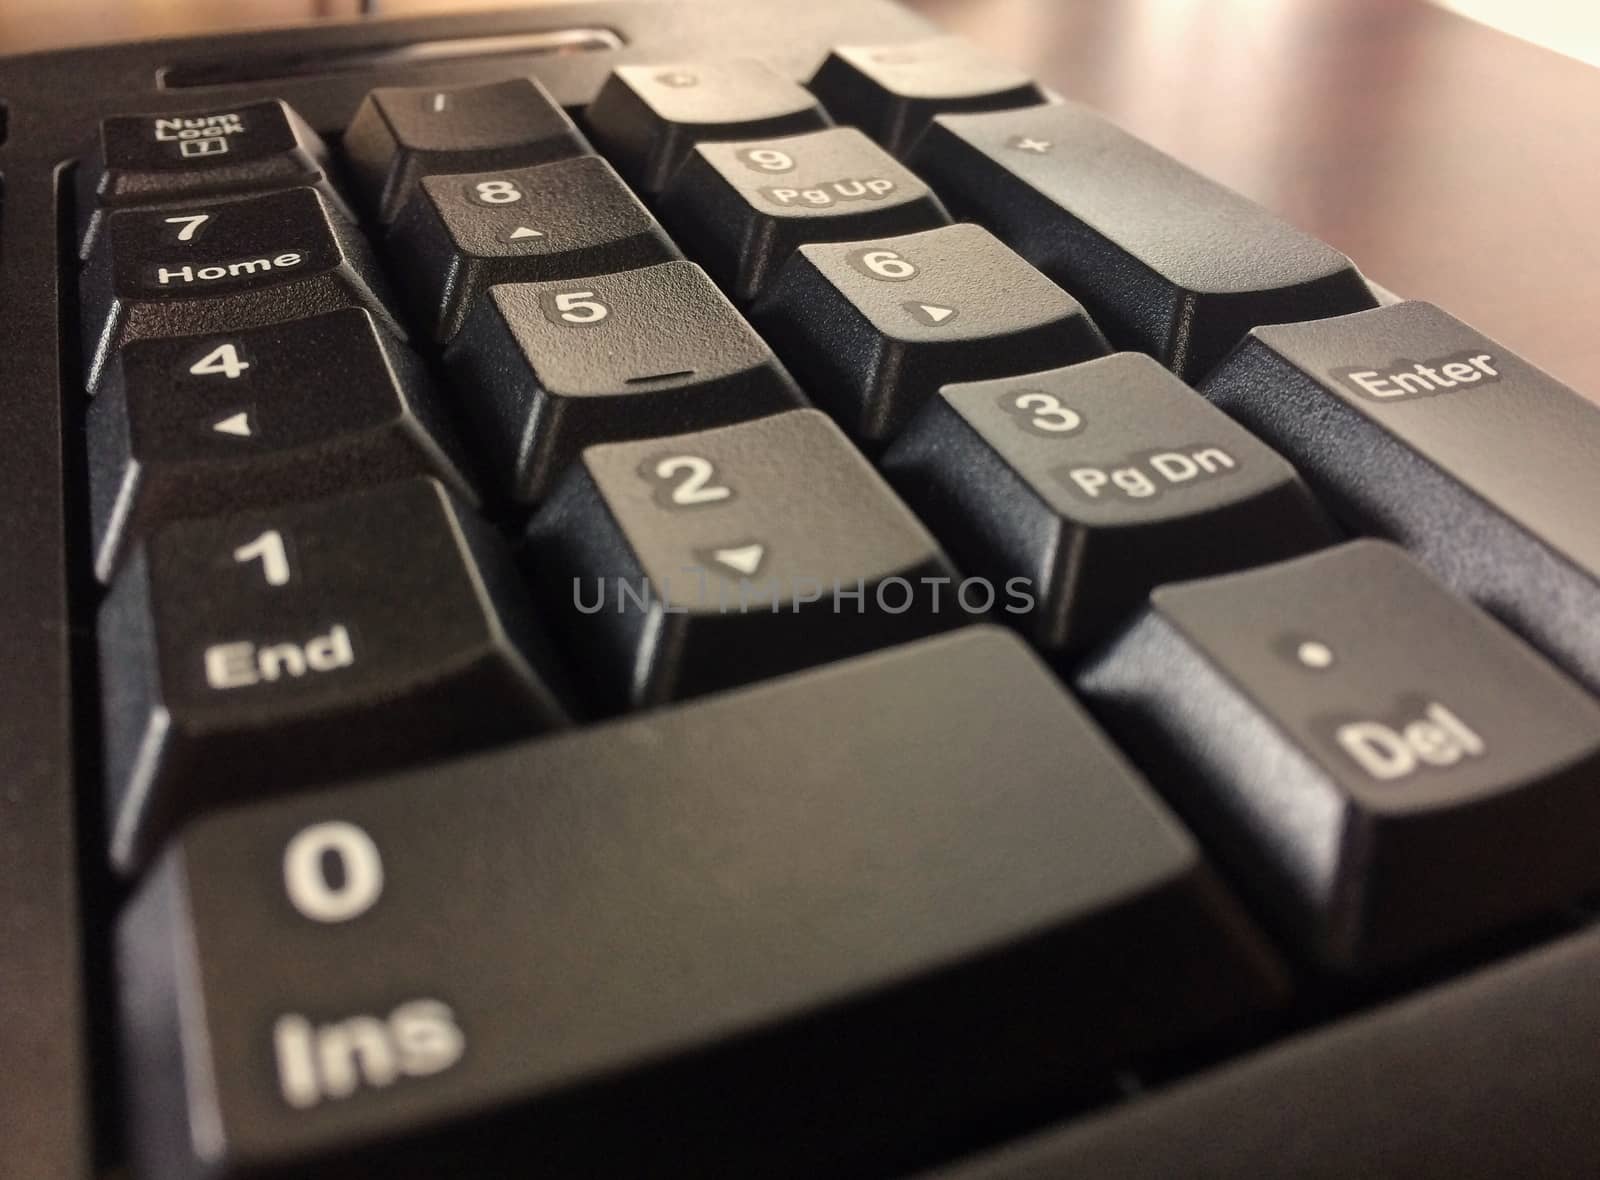 Numbers on the keyboard